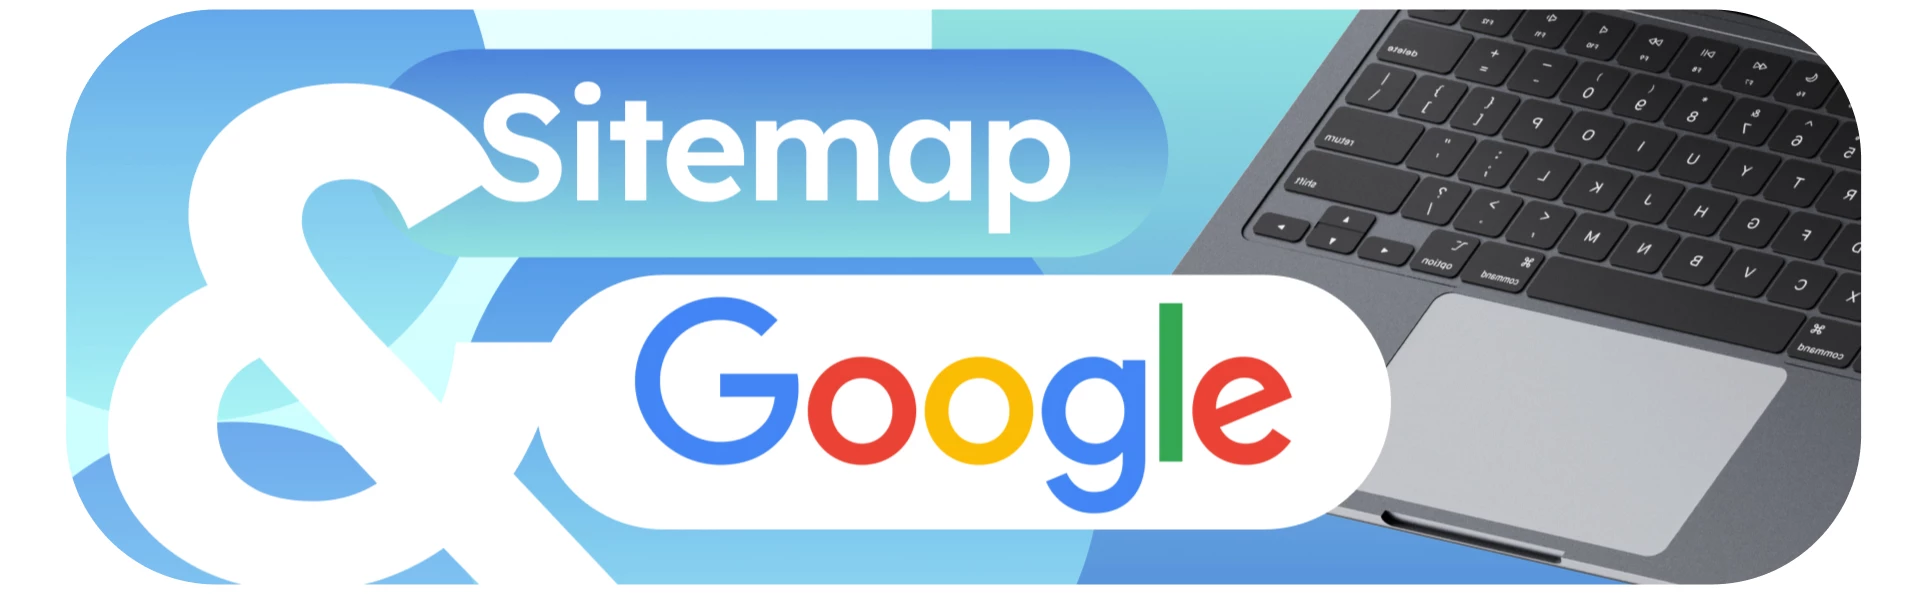 Sitemap and Google